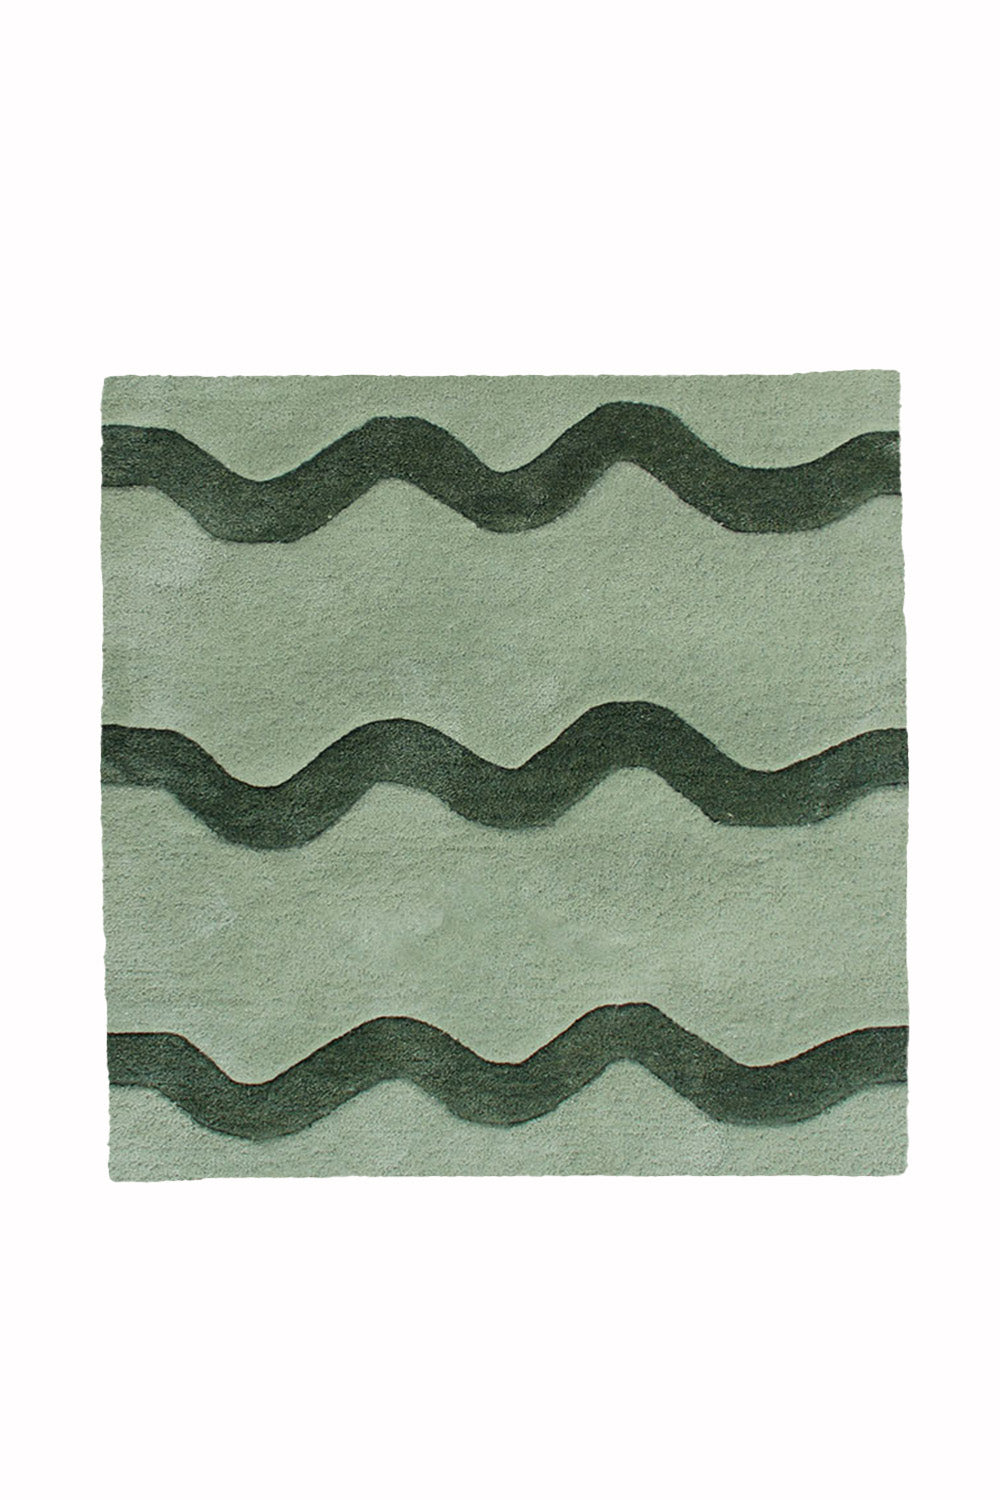 Squiggly Square Hand Tufted Wool Rug in Green by Jubi